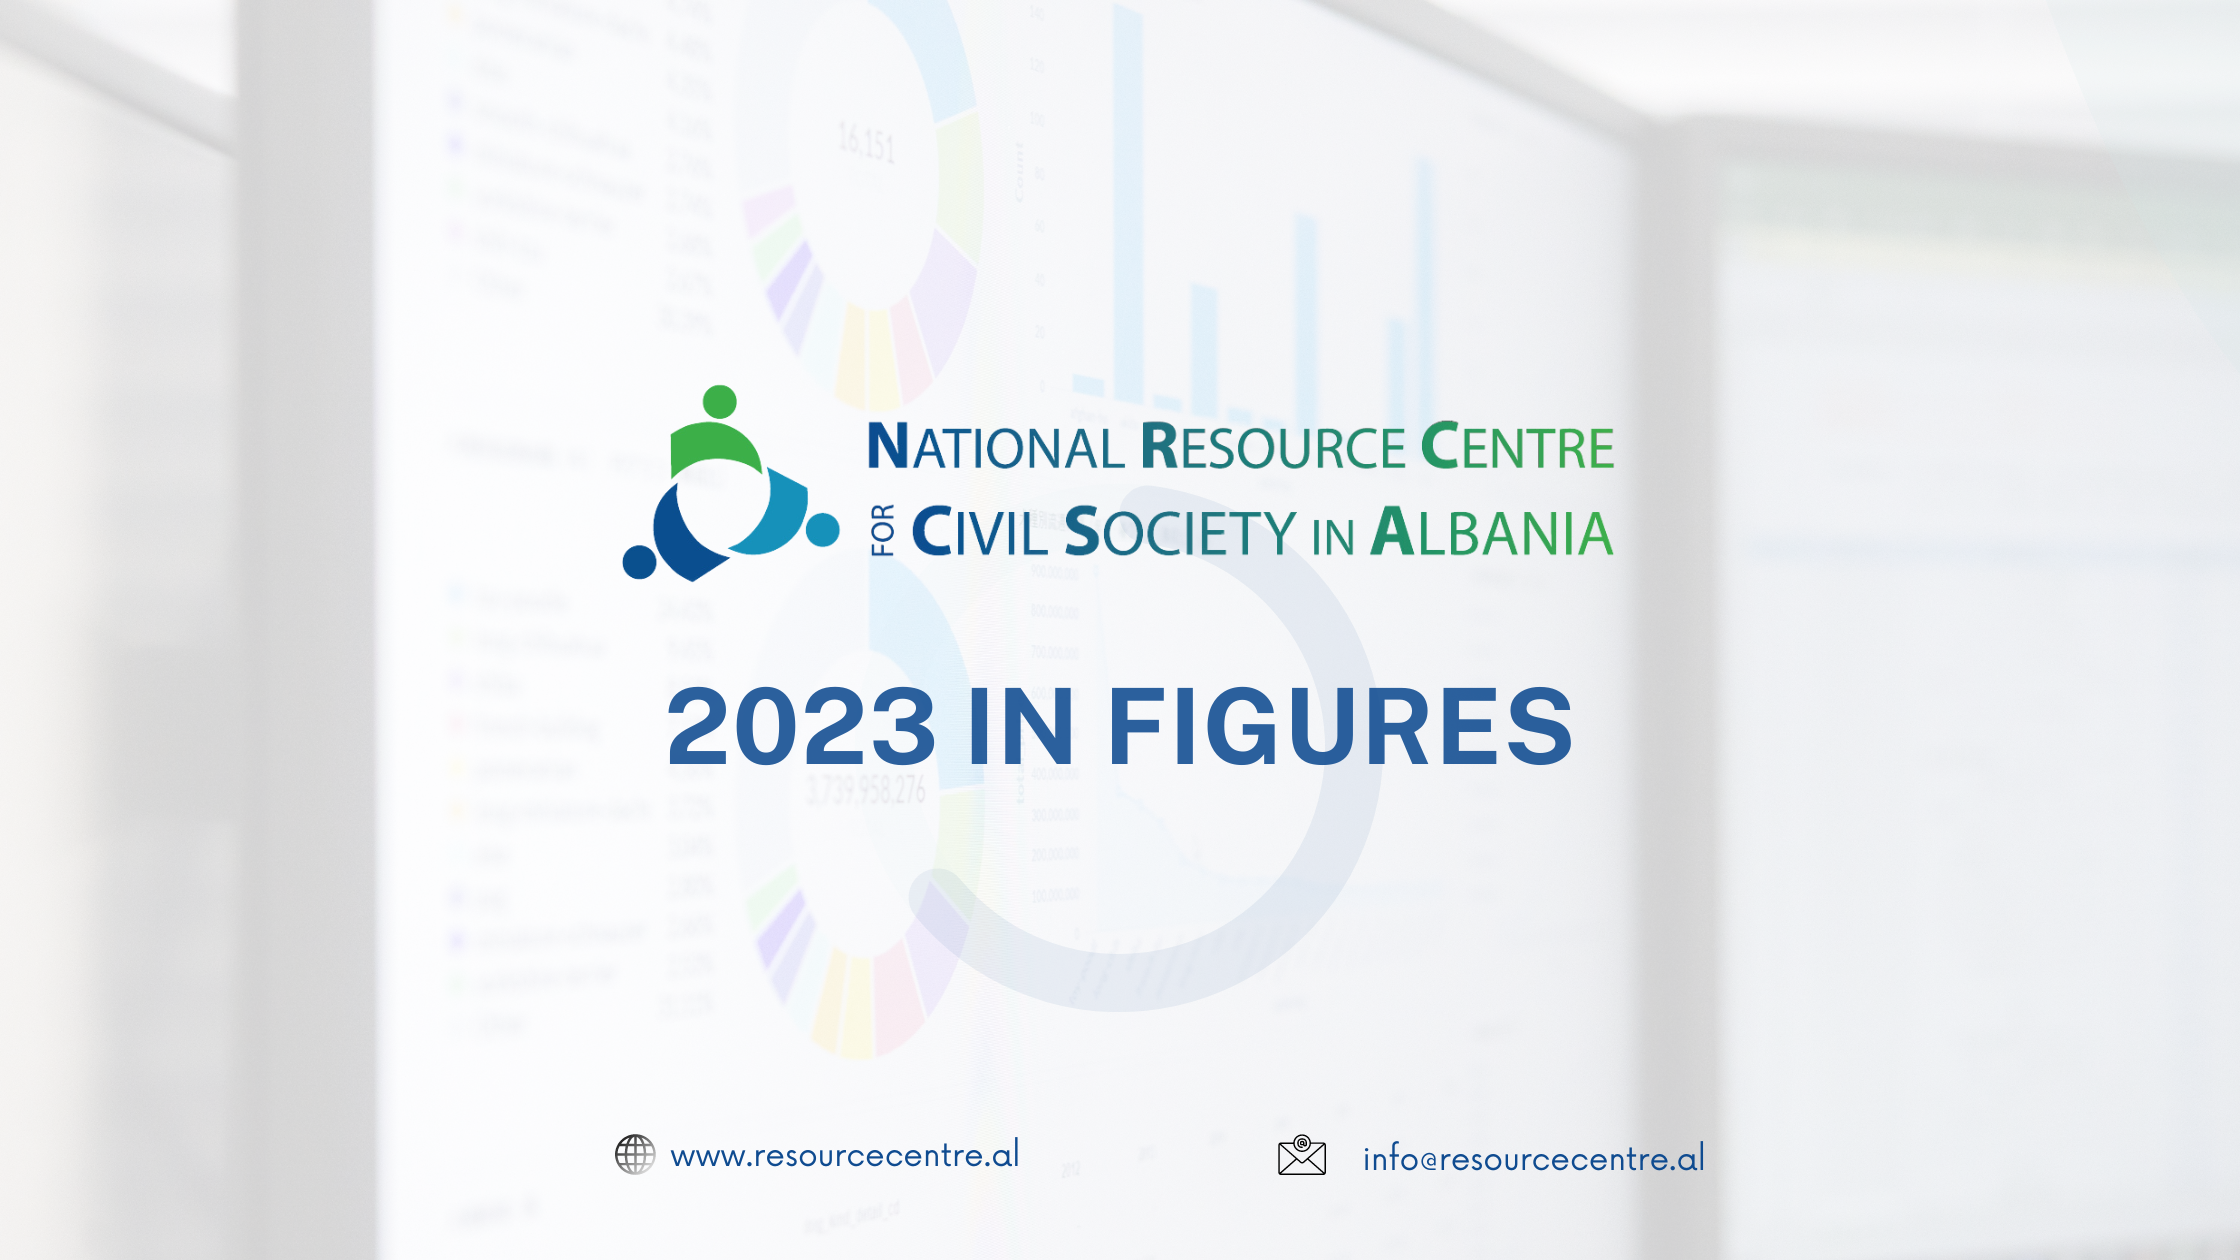 National Resource Center for Civil Society in Albania, throughout 2023!